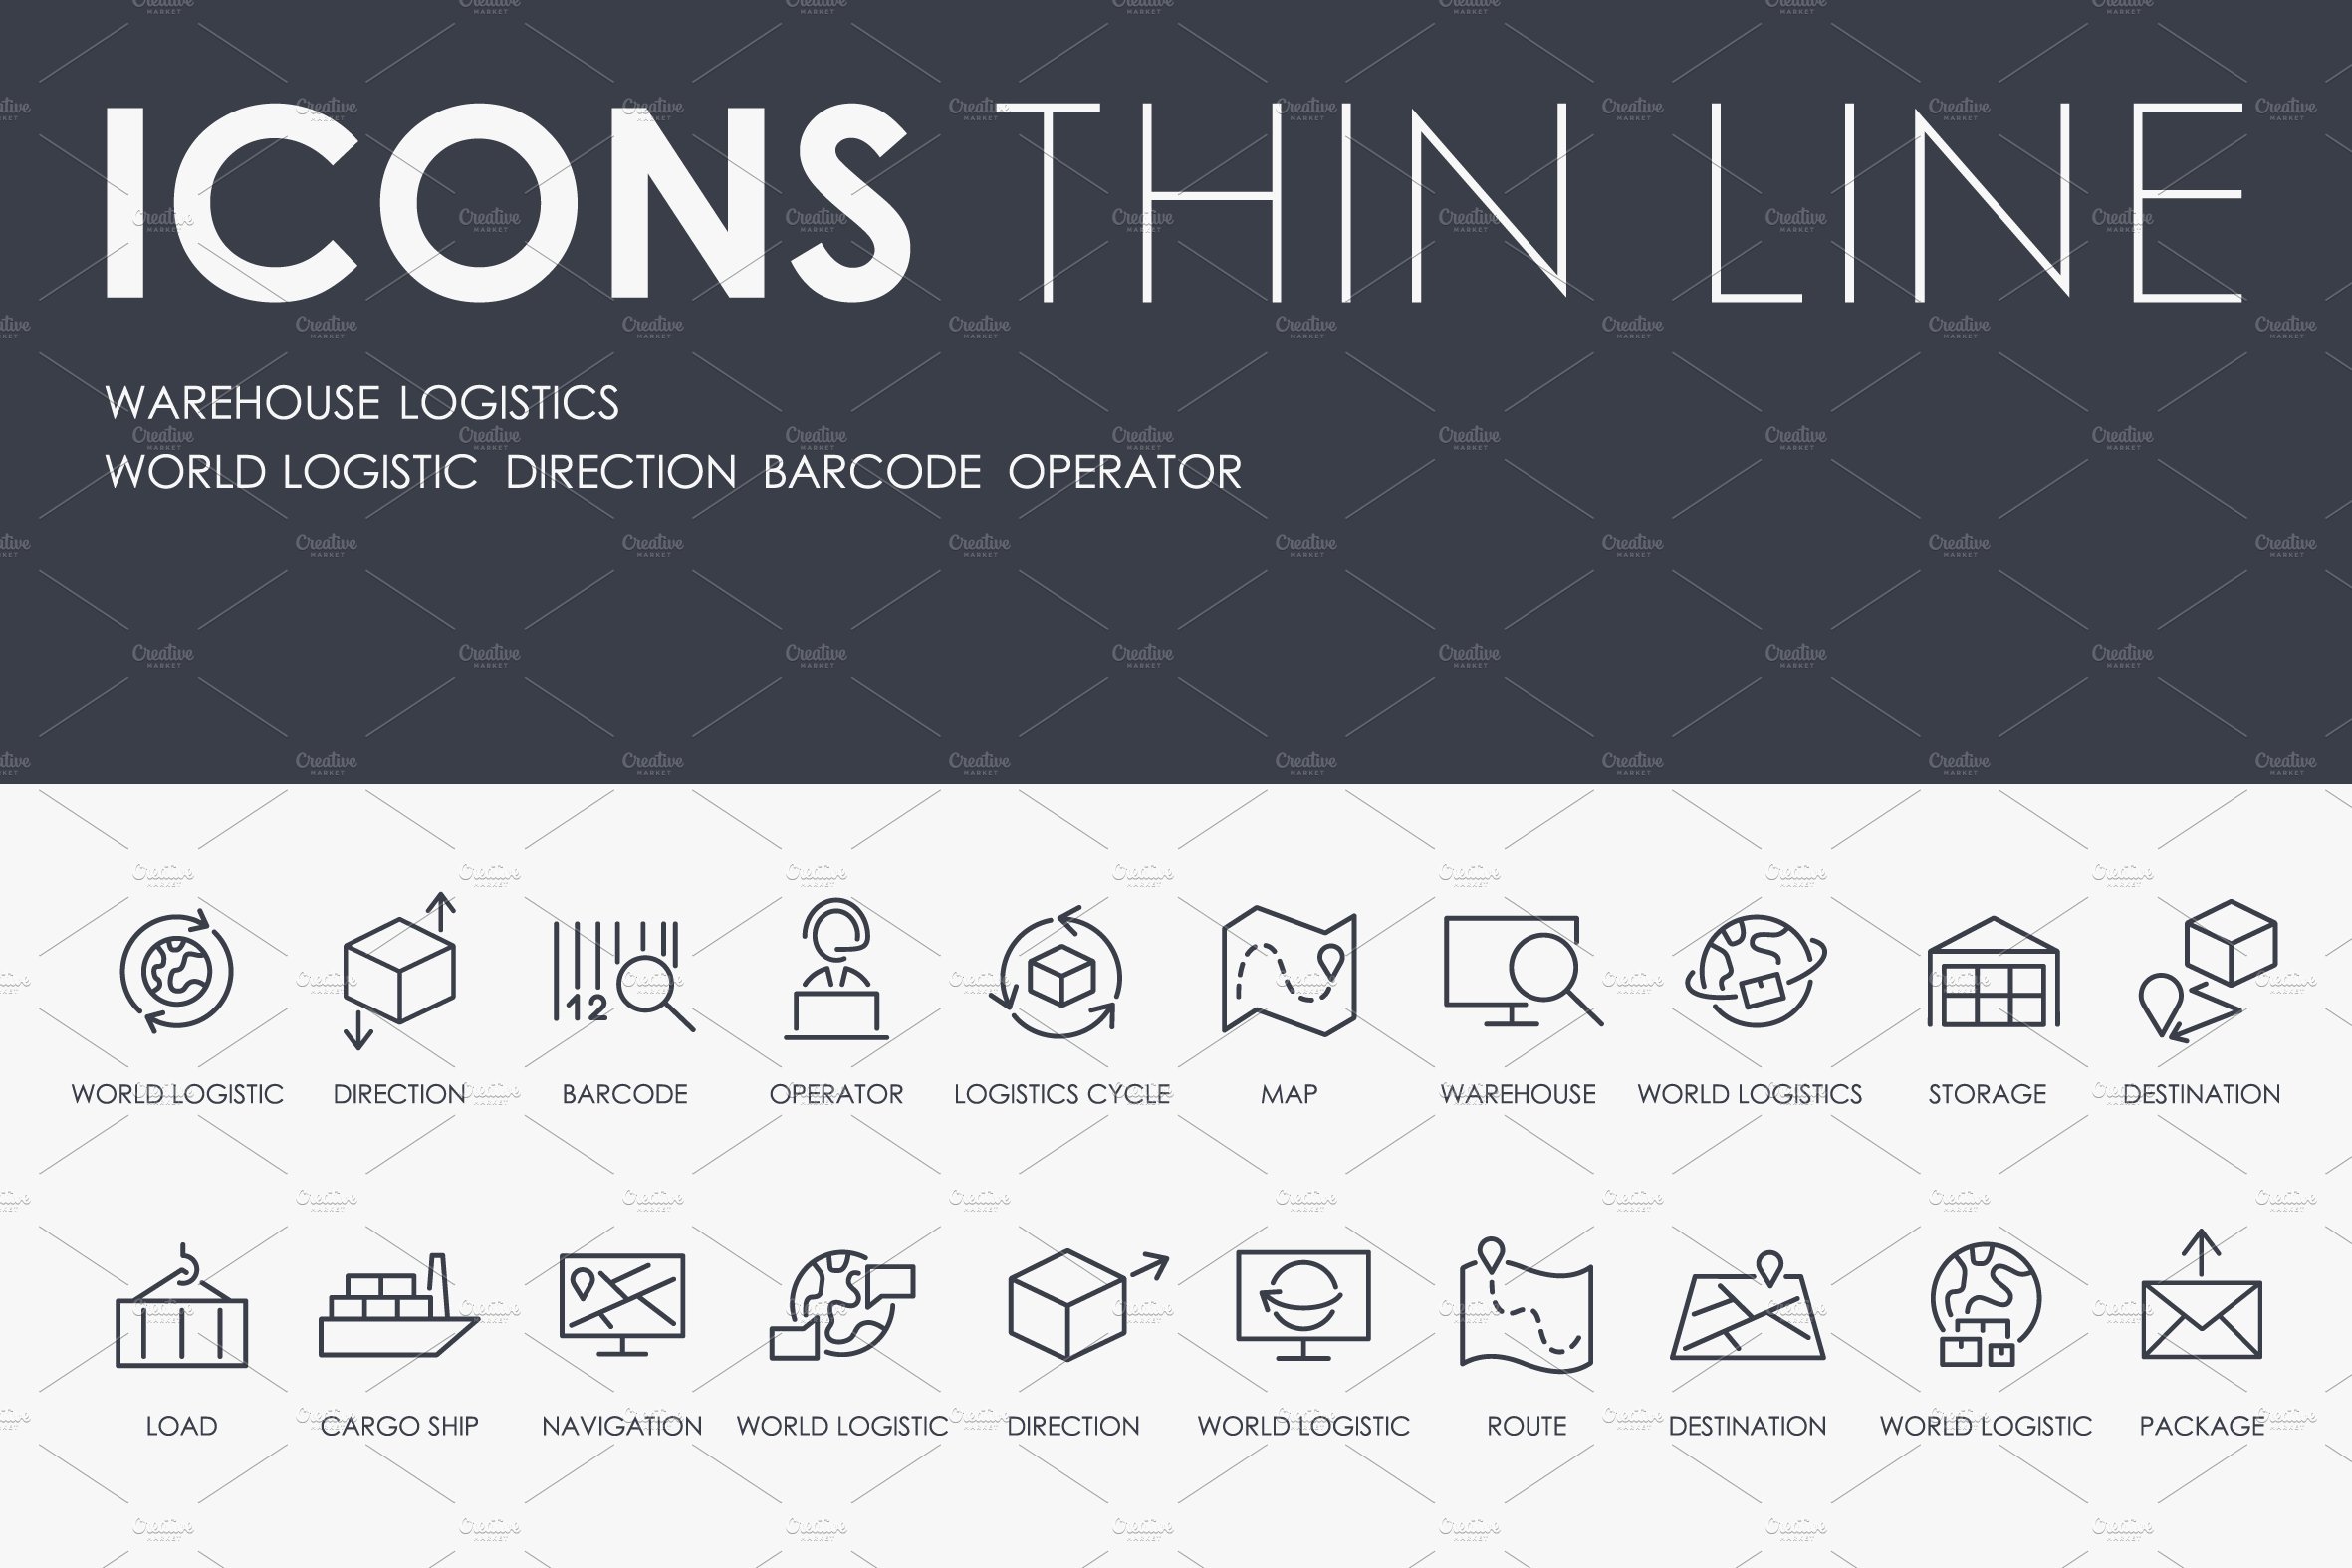 Warehouse logistics thinline icons cover image.